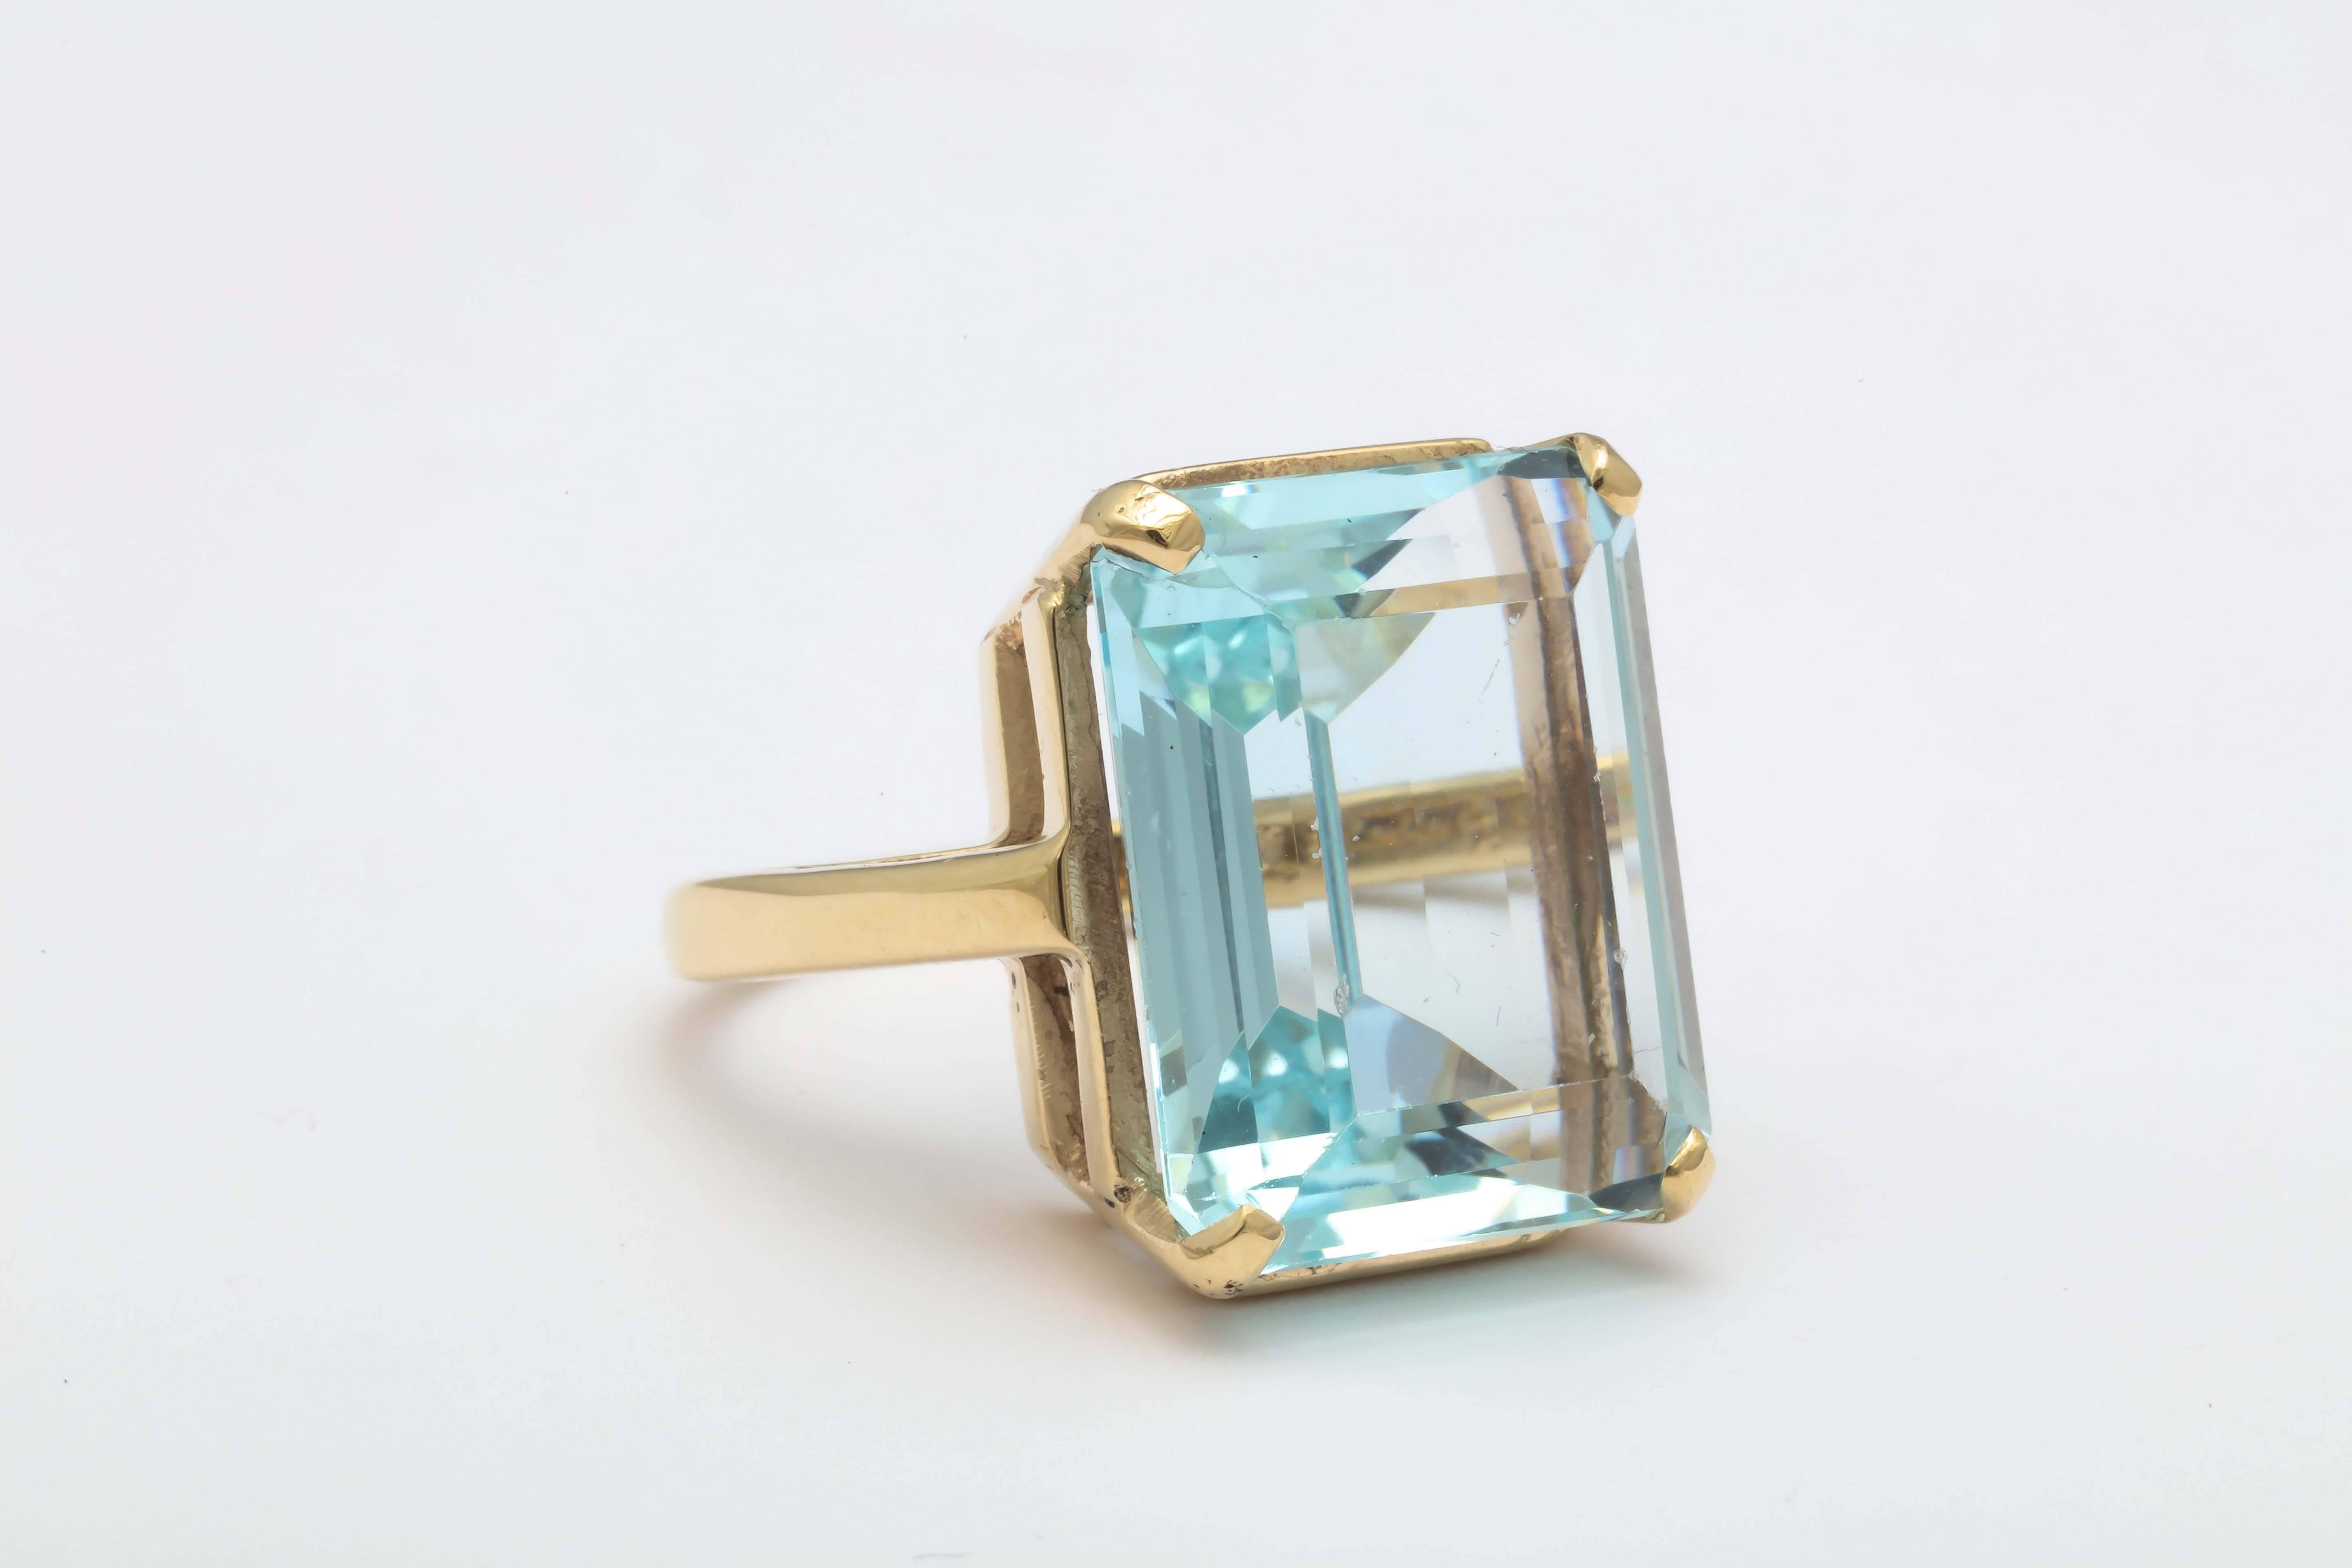  Emerald cut Aquamarine - approximately 18-20carats it is set in 14t Yellow Gold Retro Mounting.  The yellow gold mounting in contrast to the mostly White Gold mountings of the period.  Good cook and very rich looking set in Yellow Gold.